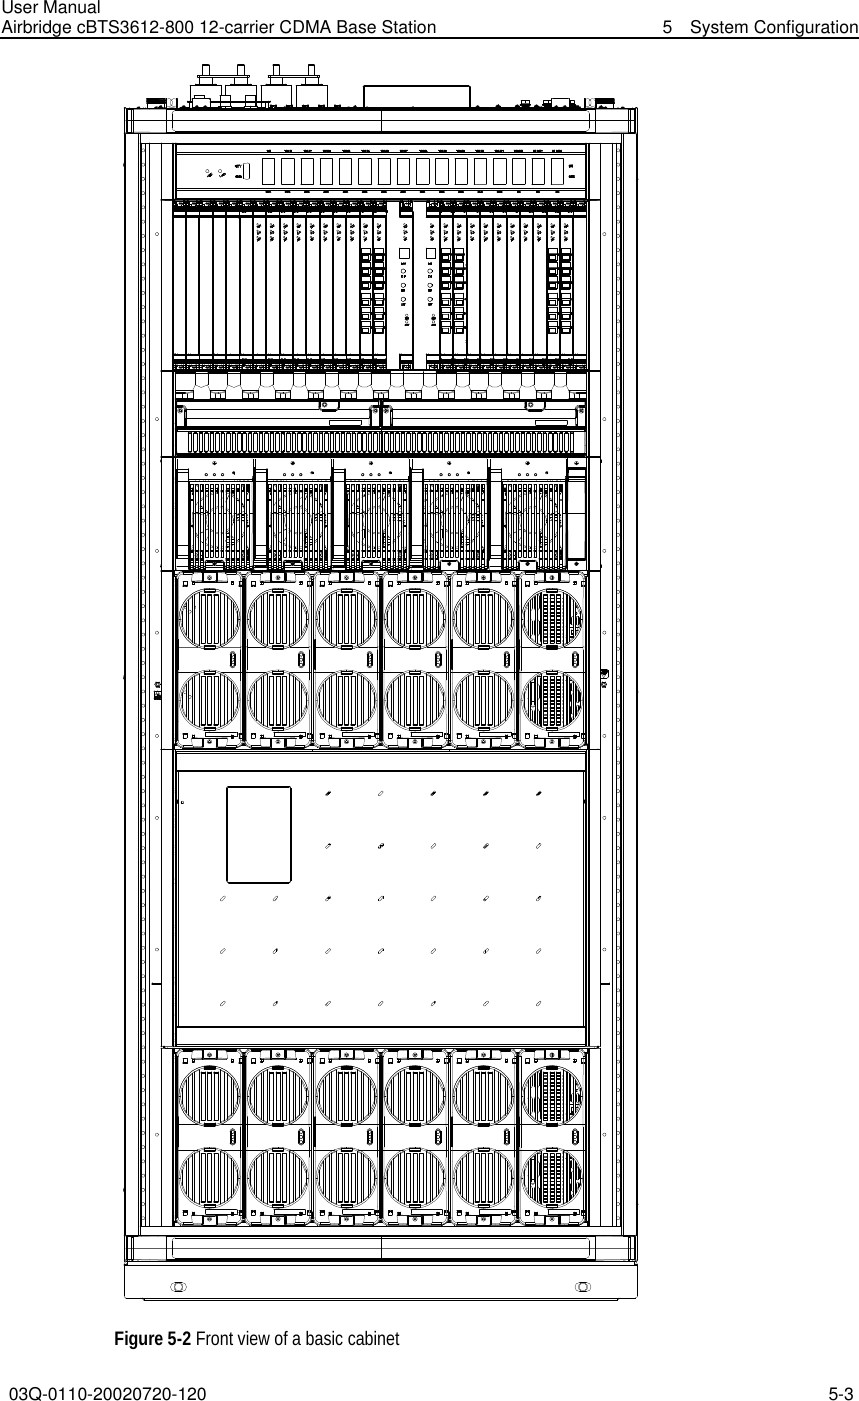 User Manual Airbridge cBTS3612-800 12-carrier CDMA Base Station   5  System Configuration 03Q-0110-20020720-120 5-3   Figure 5-2 Front view of a basic cabinet   